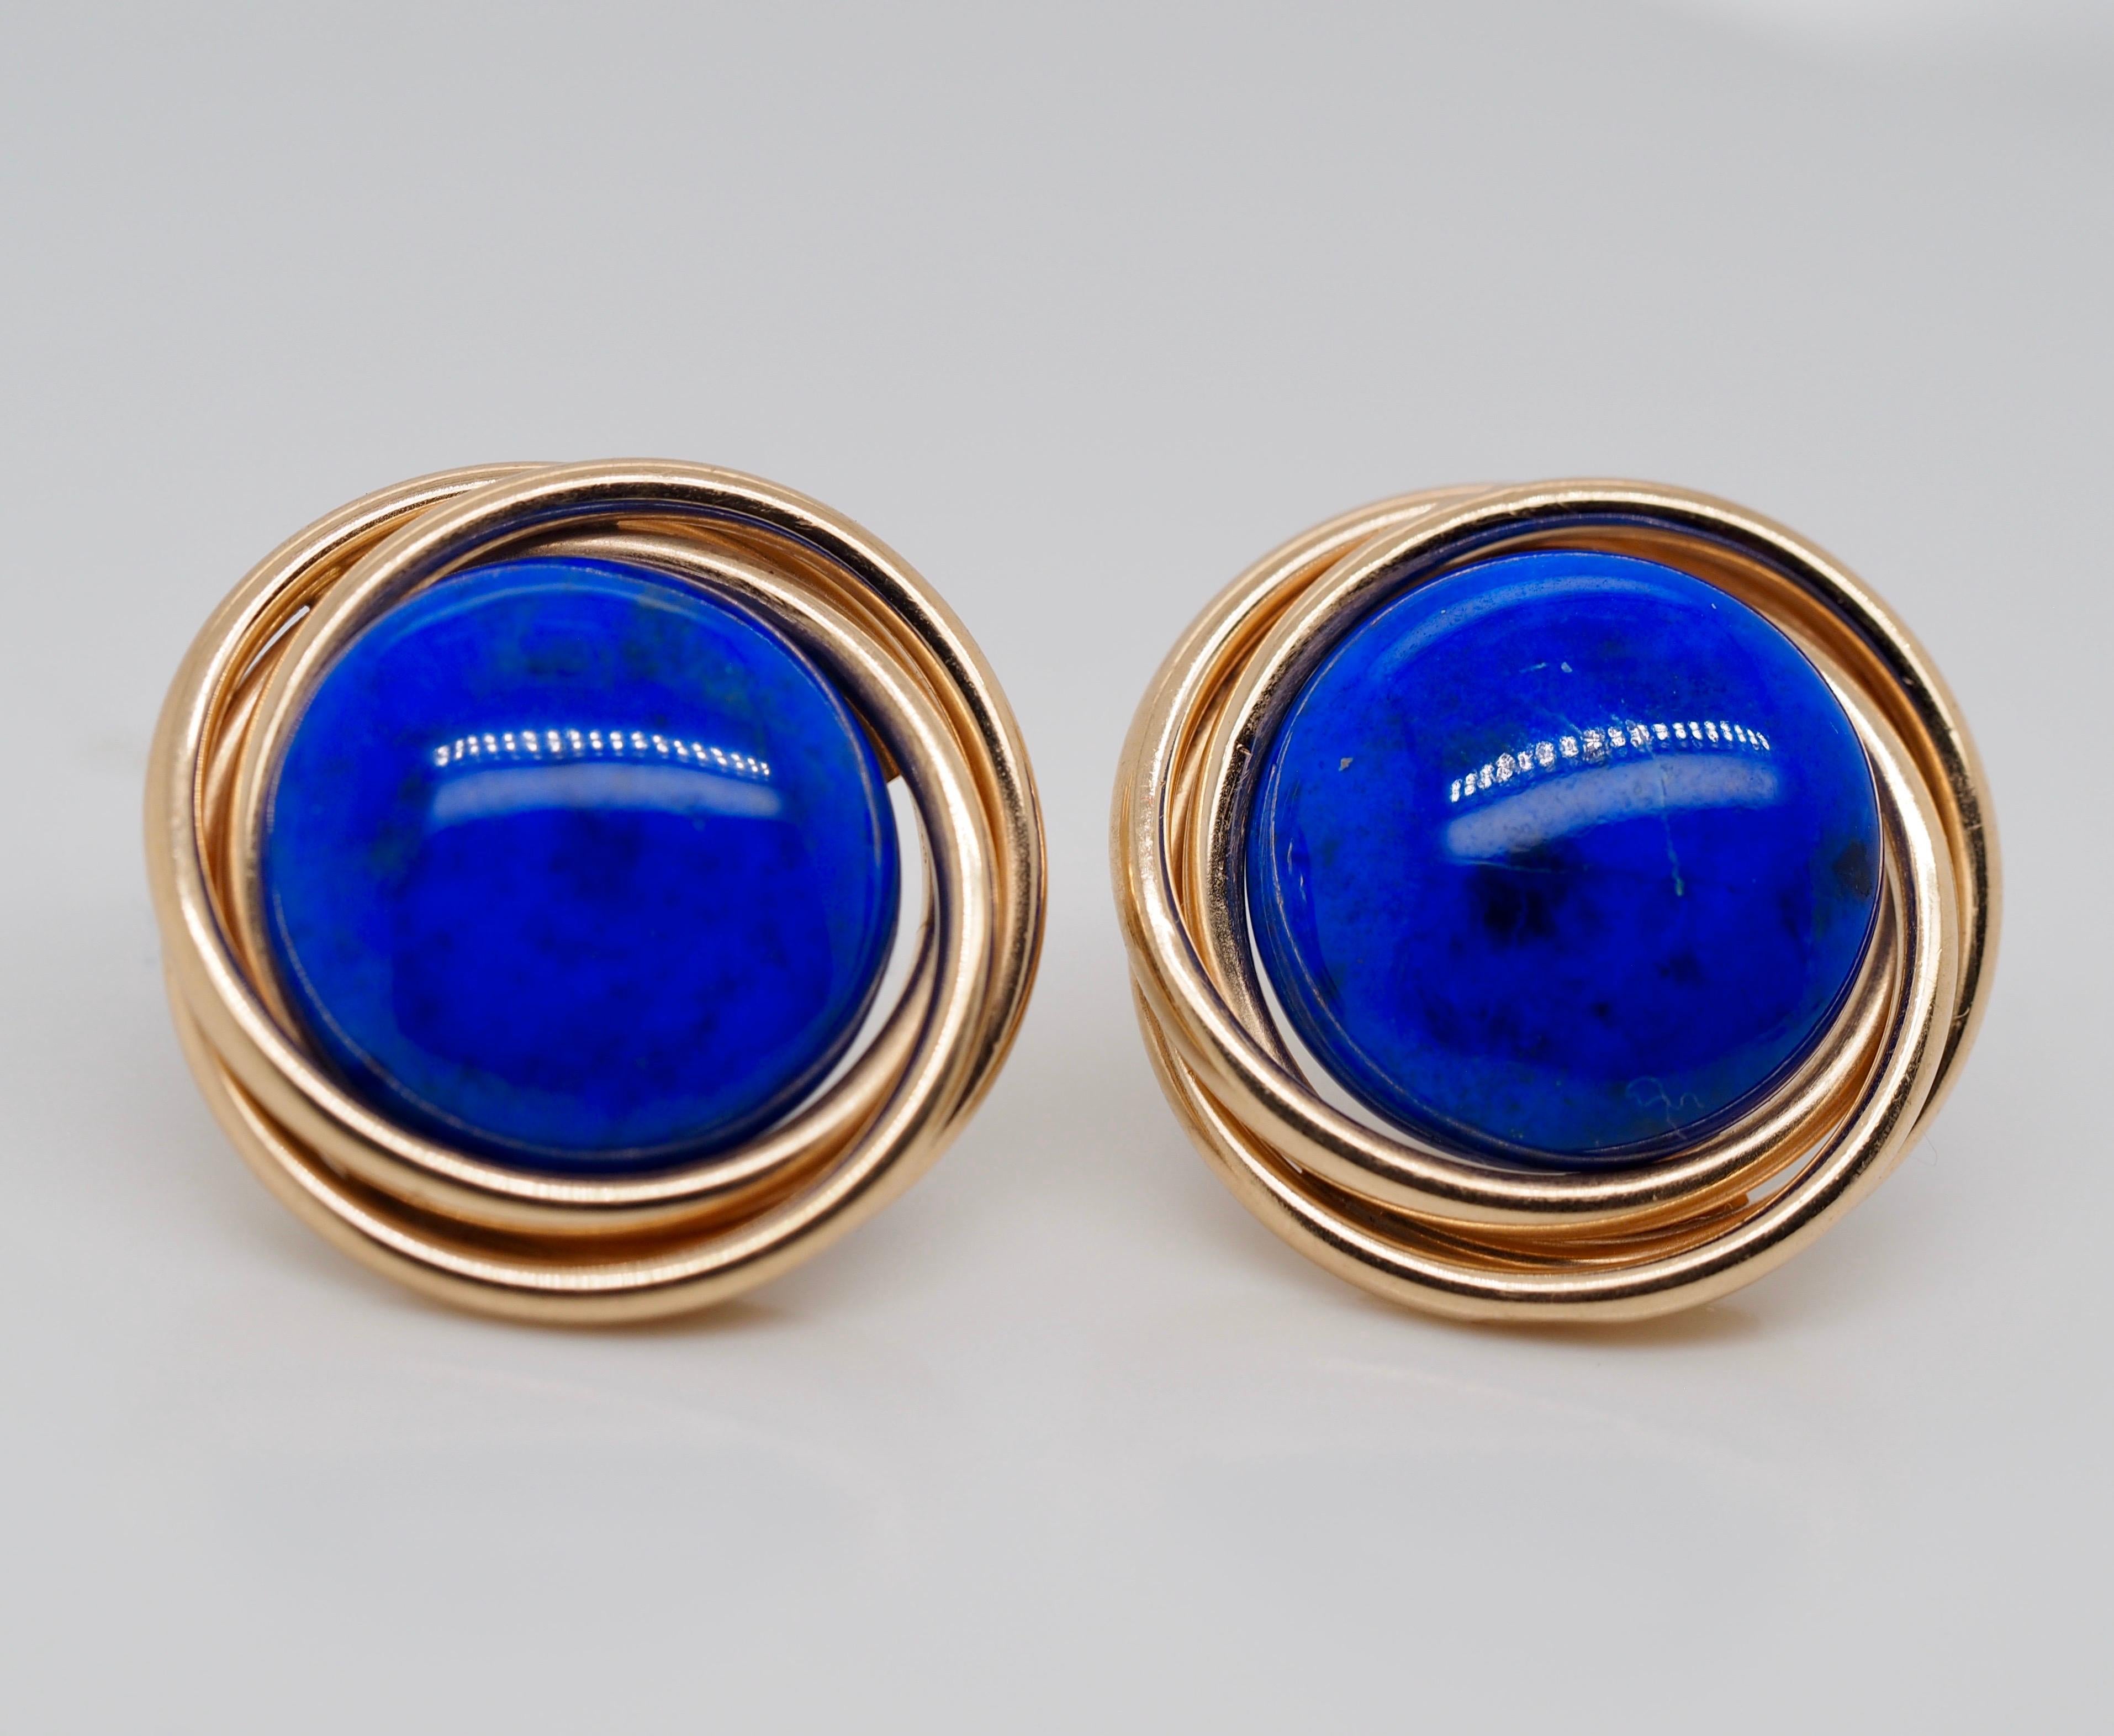 Cabochon Lapis Lazulli earrings with 14 karat yellow gold posts and base metal ear nuts measuring 15.15 x 3.90 mm enhanced by 14 karat yellow gold intertwined jackets.  21.37 mm in diameter with jackets. The center lapis are illuminating in a bright